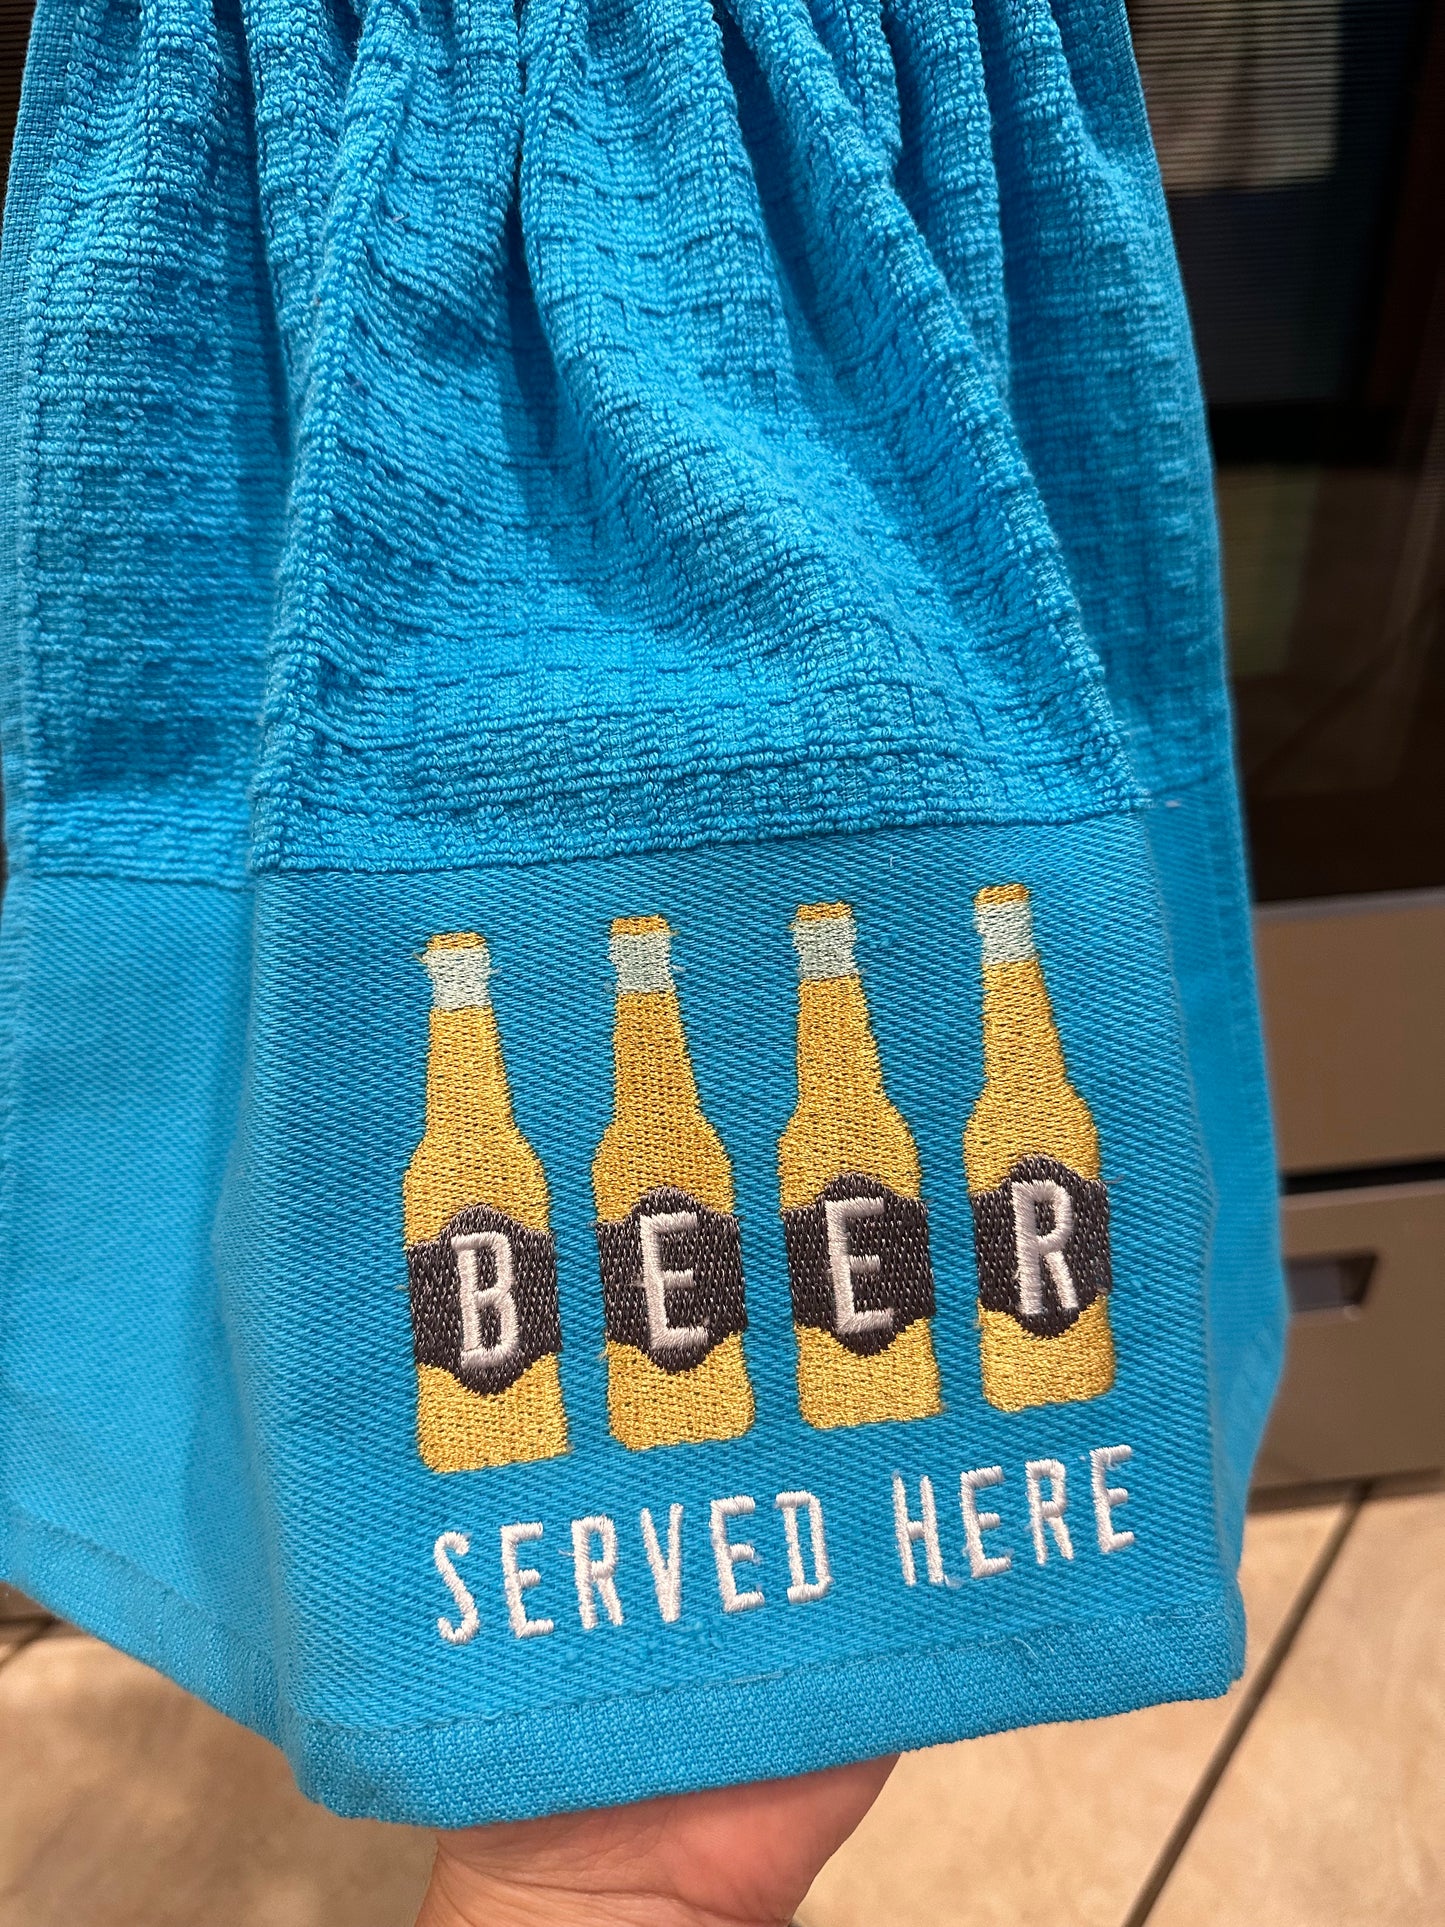 Served Here Towel